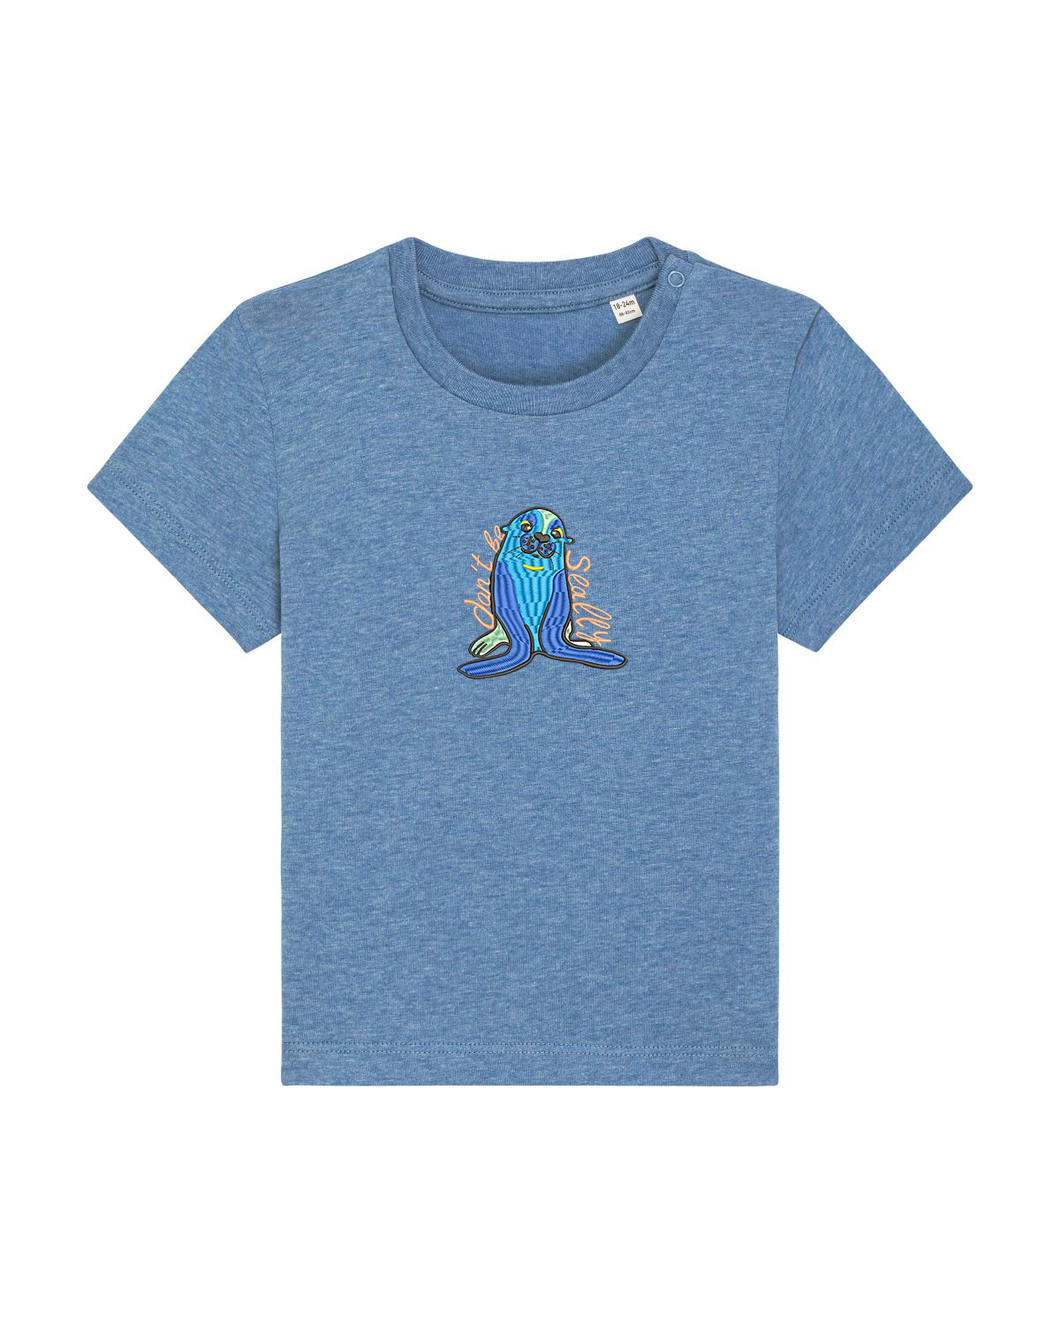 Don't be seally -  Embroidered baby tshirt